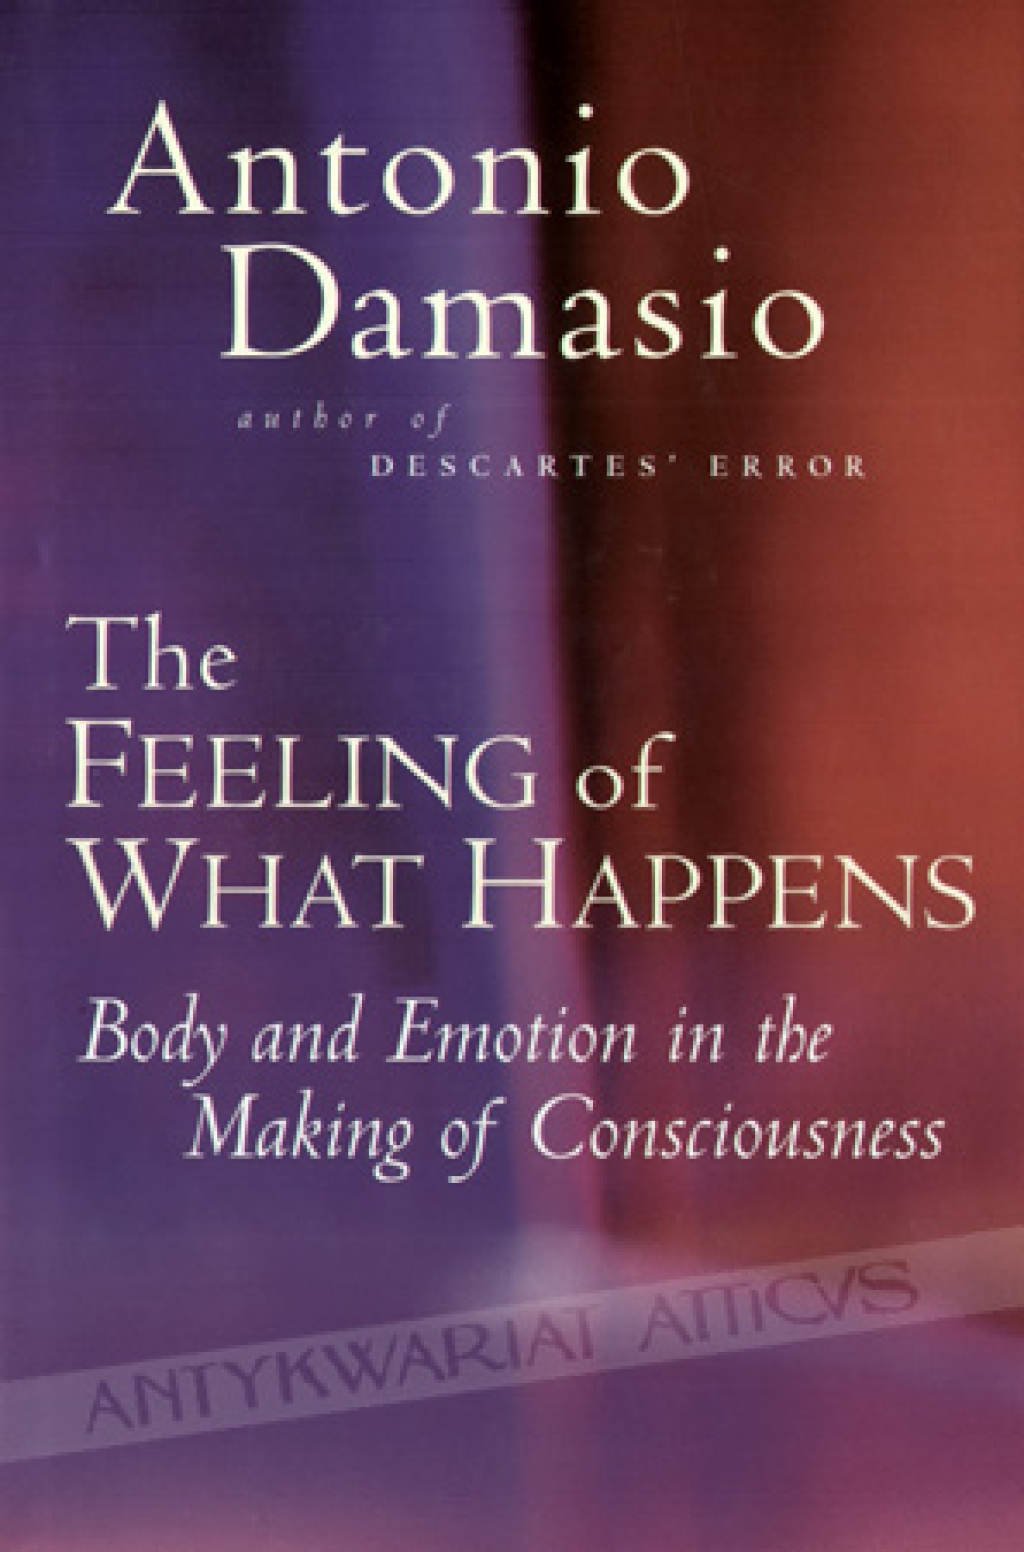 The Feeling of What Happens. Body and Emotion in the Making of Consciousness